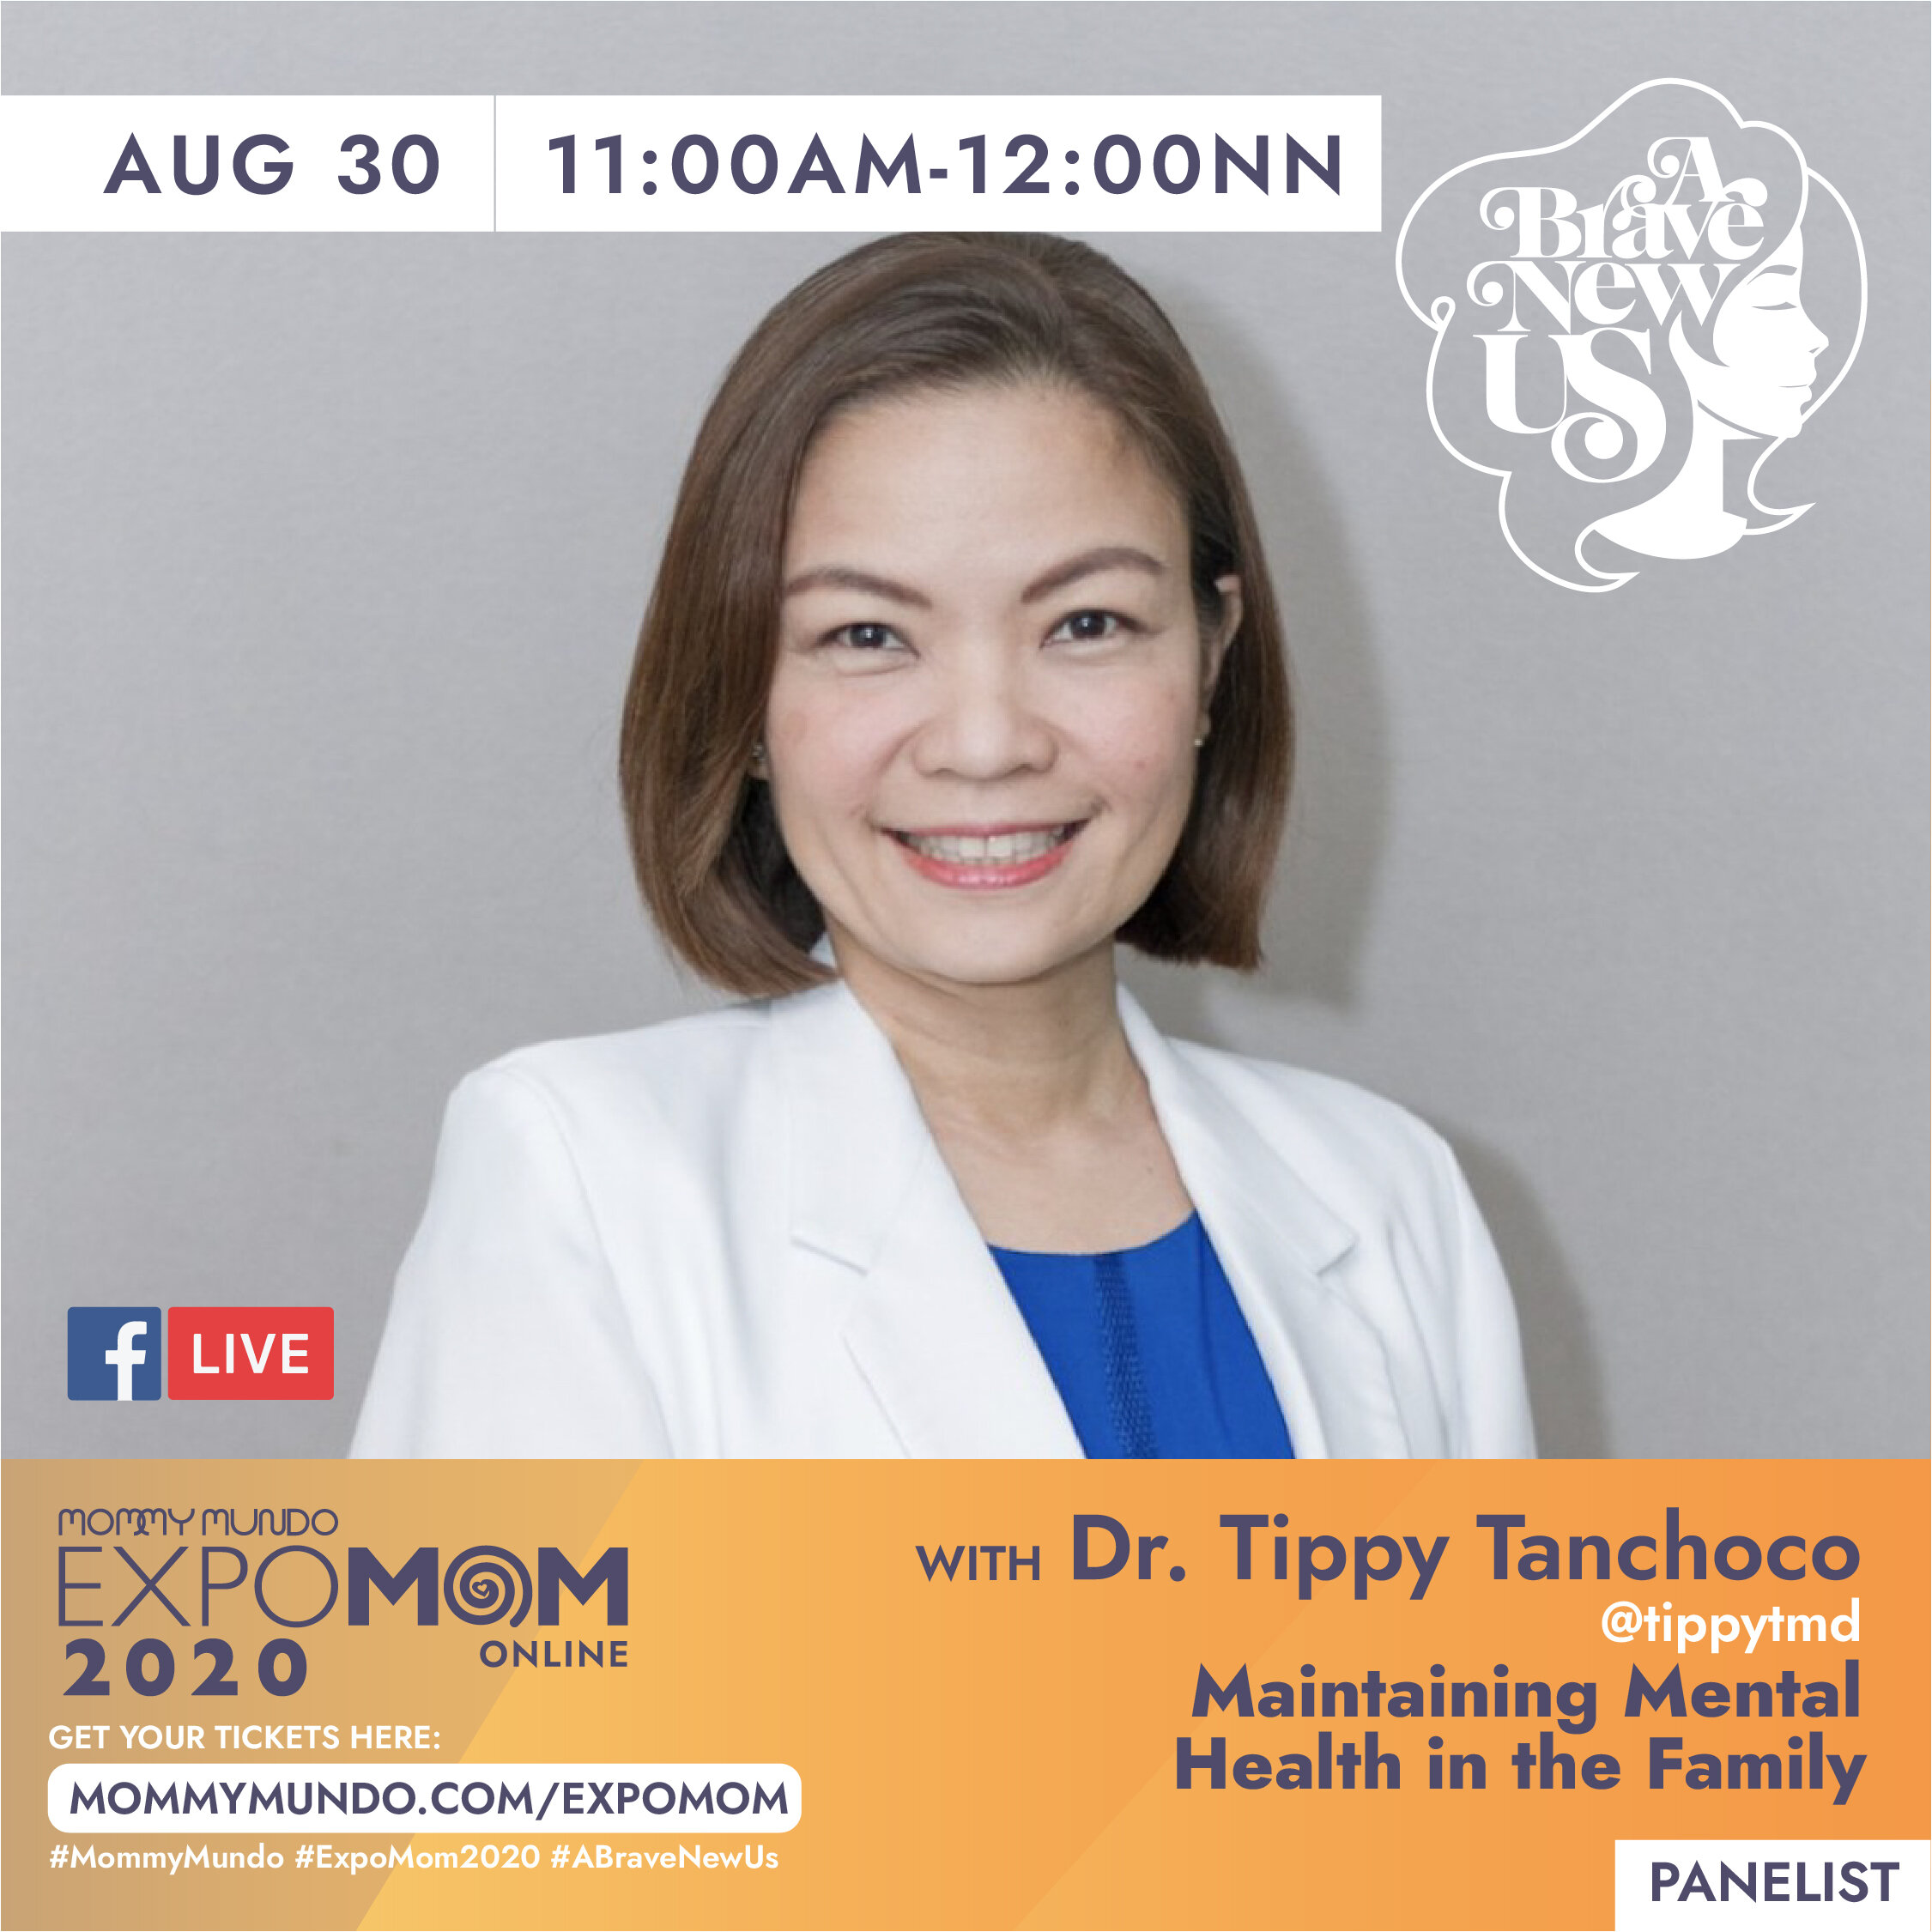   Dr. Lourdes Bernadette “Tippy” Sumpaico-Tanchanco , MD, MSc, FPPS, FPSDBP is the clinic director and practicing developmental-behavioral pediatrician at MedMom Child Development Clinic. She is also an Associate Professor at the Ateneo School of Med